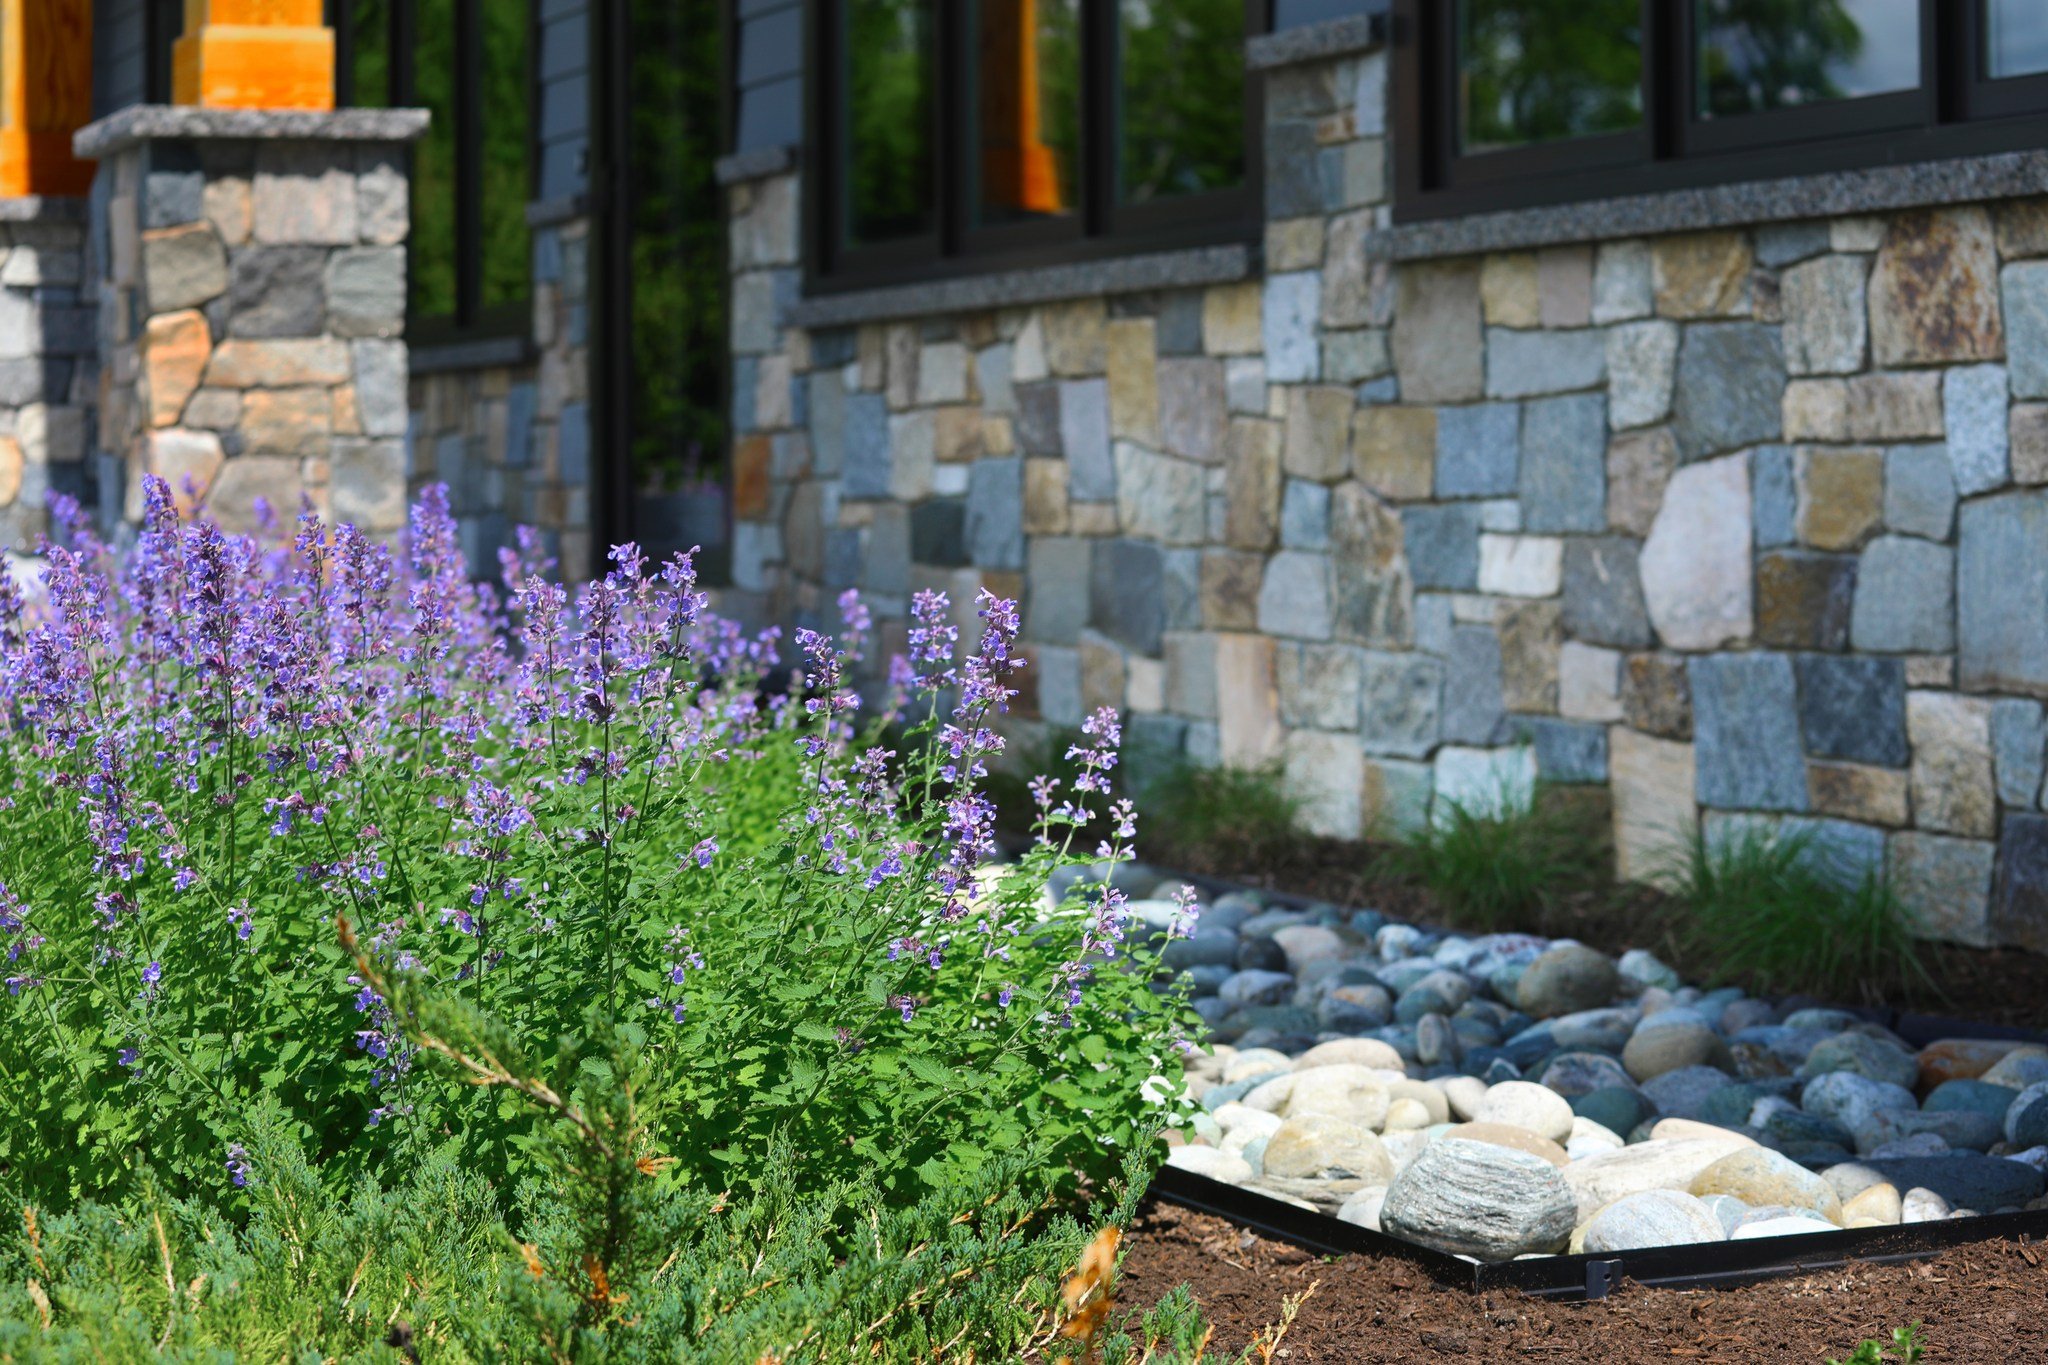 Nepeta faassenii &lsquo;Walker&rsquo;s Low&rsquo; (catmint) thrives in harsh conditions and is a fan-favorite amongst honeybees and bumblebees! We love utilizing this colorful plant on mountain-top properties when wind and water can be of concern.

 